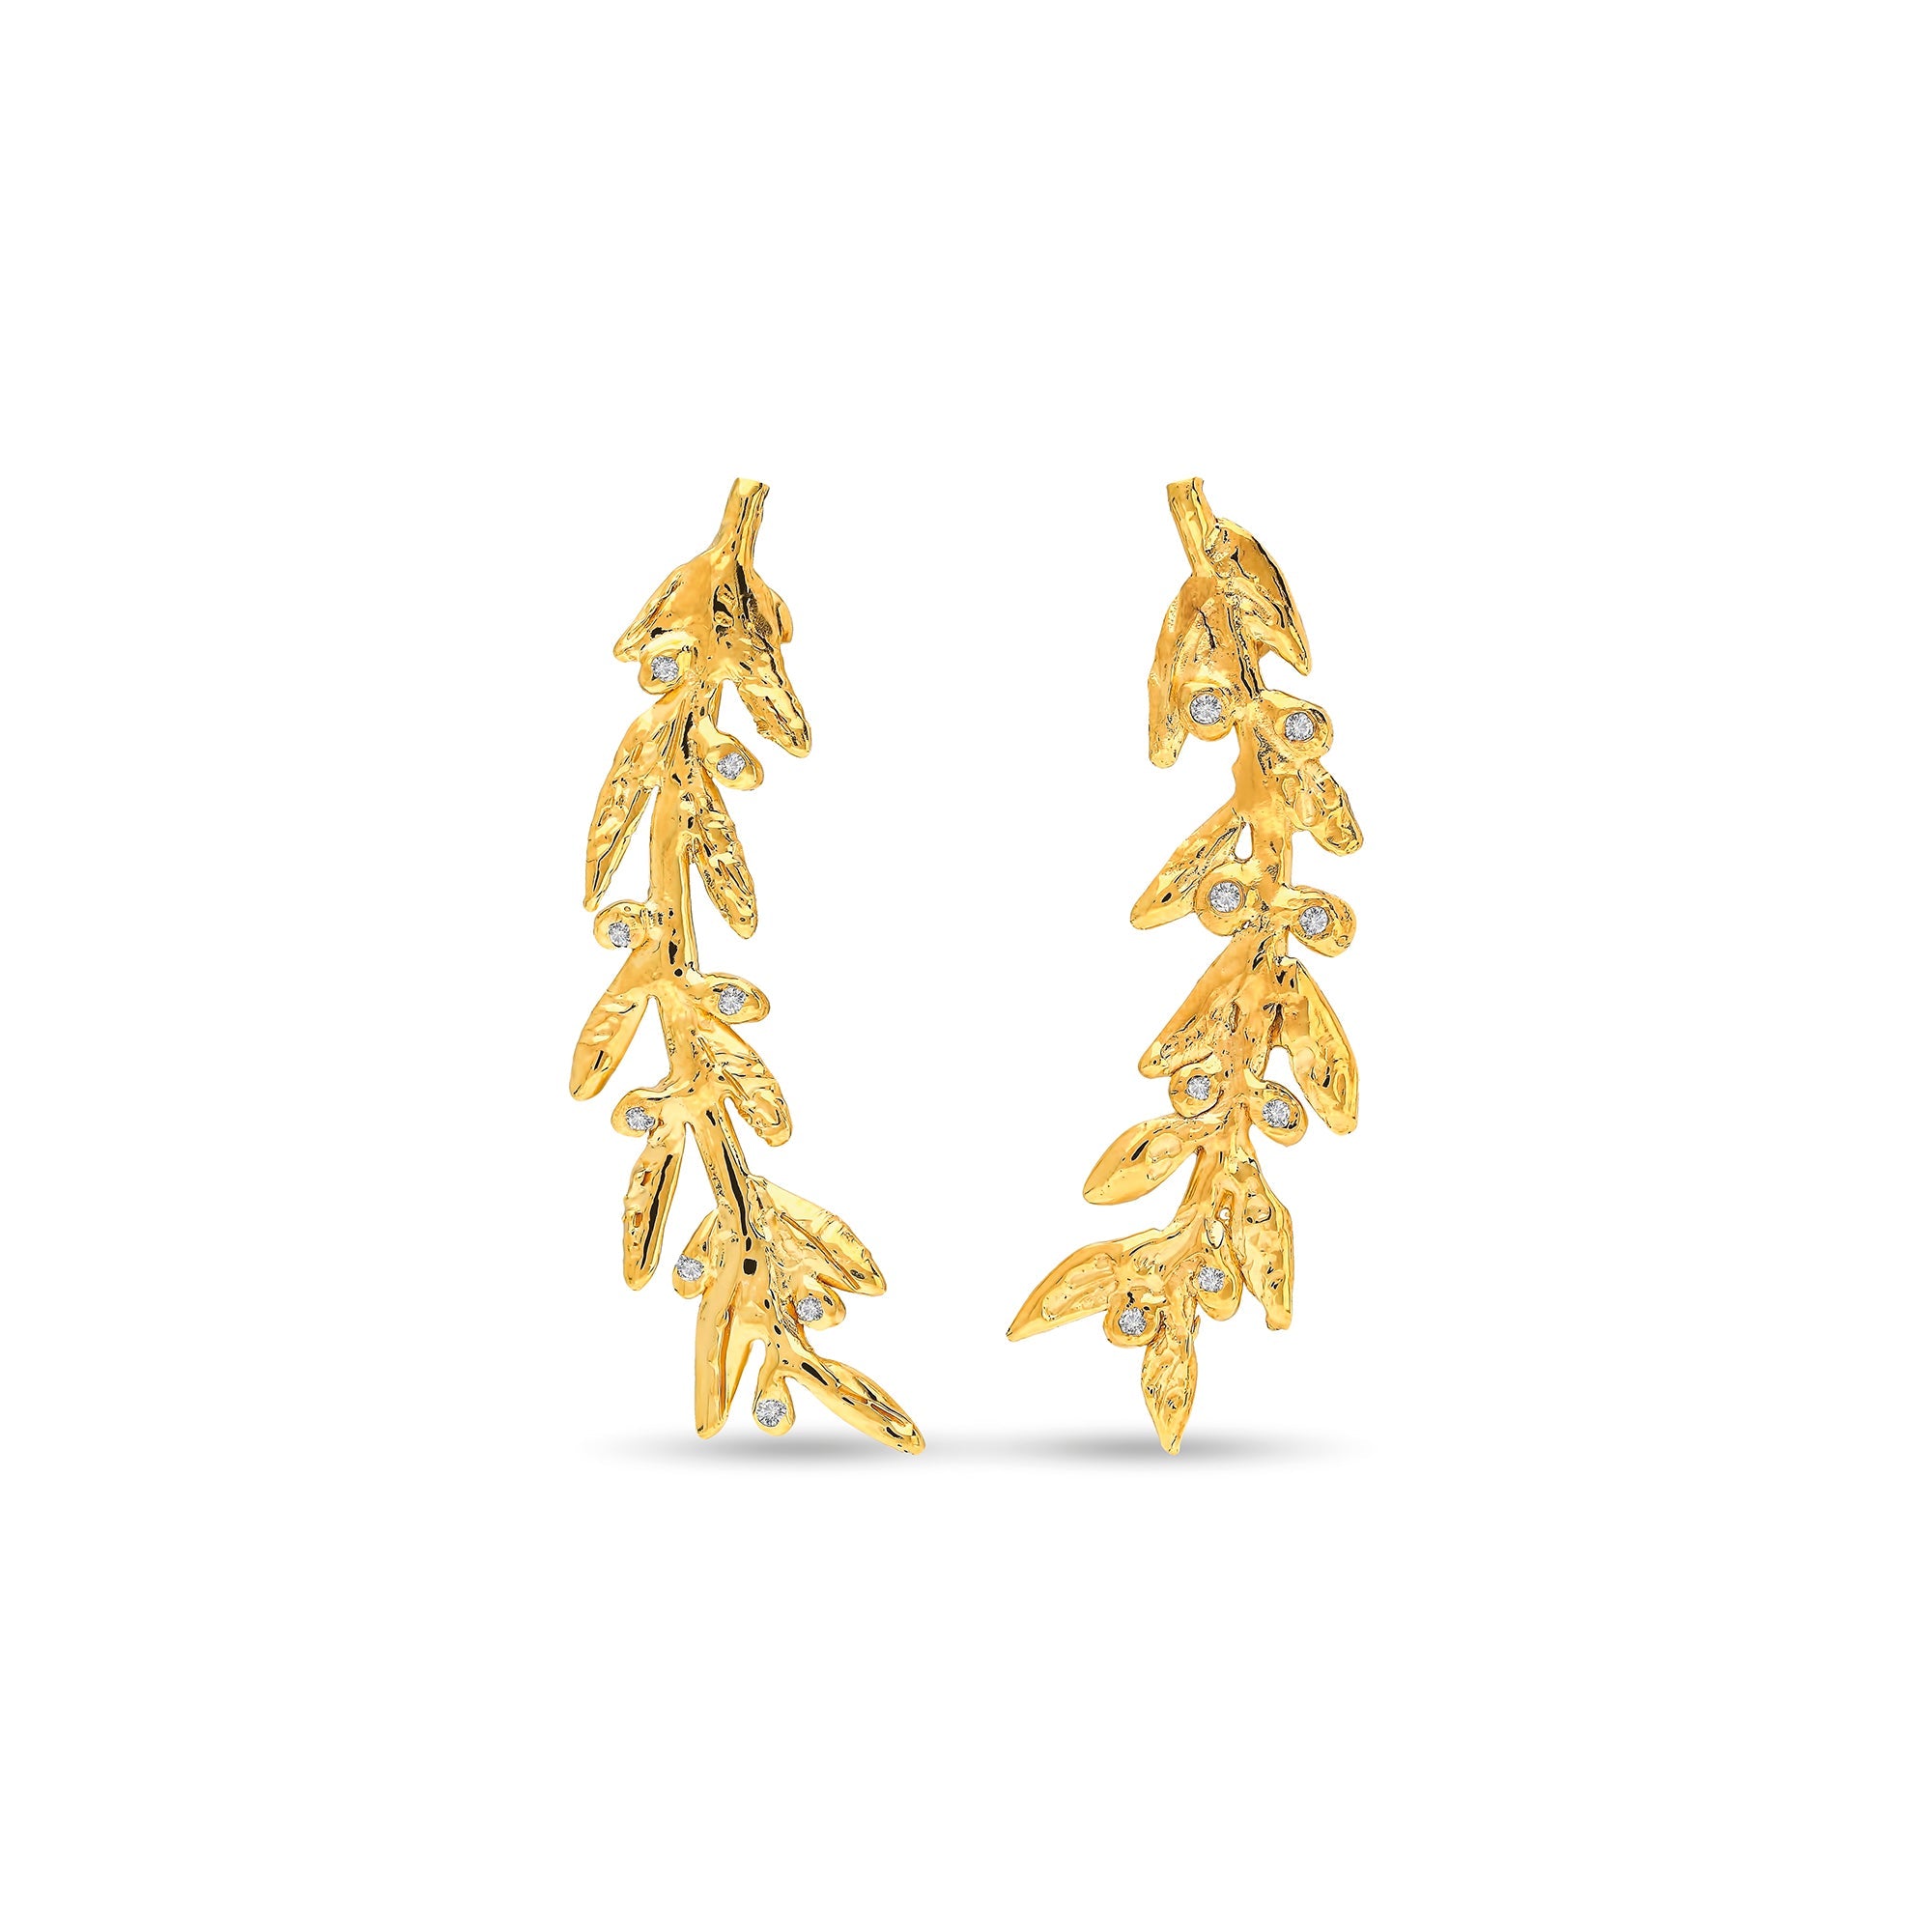 The Olive Branch Earrings